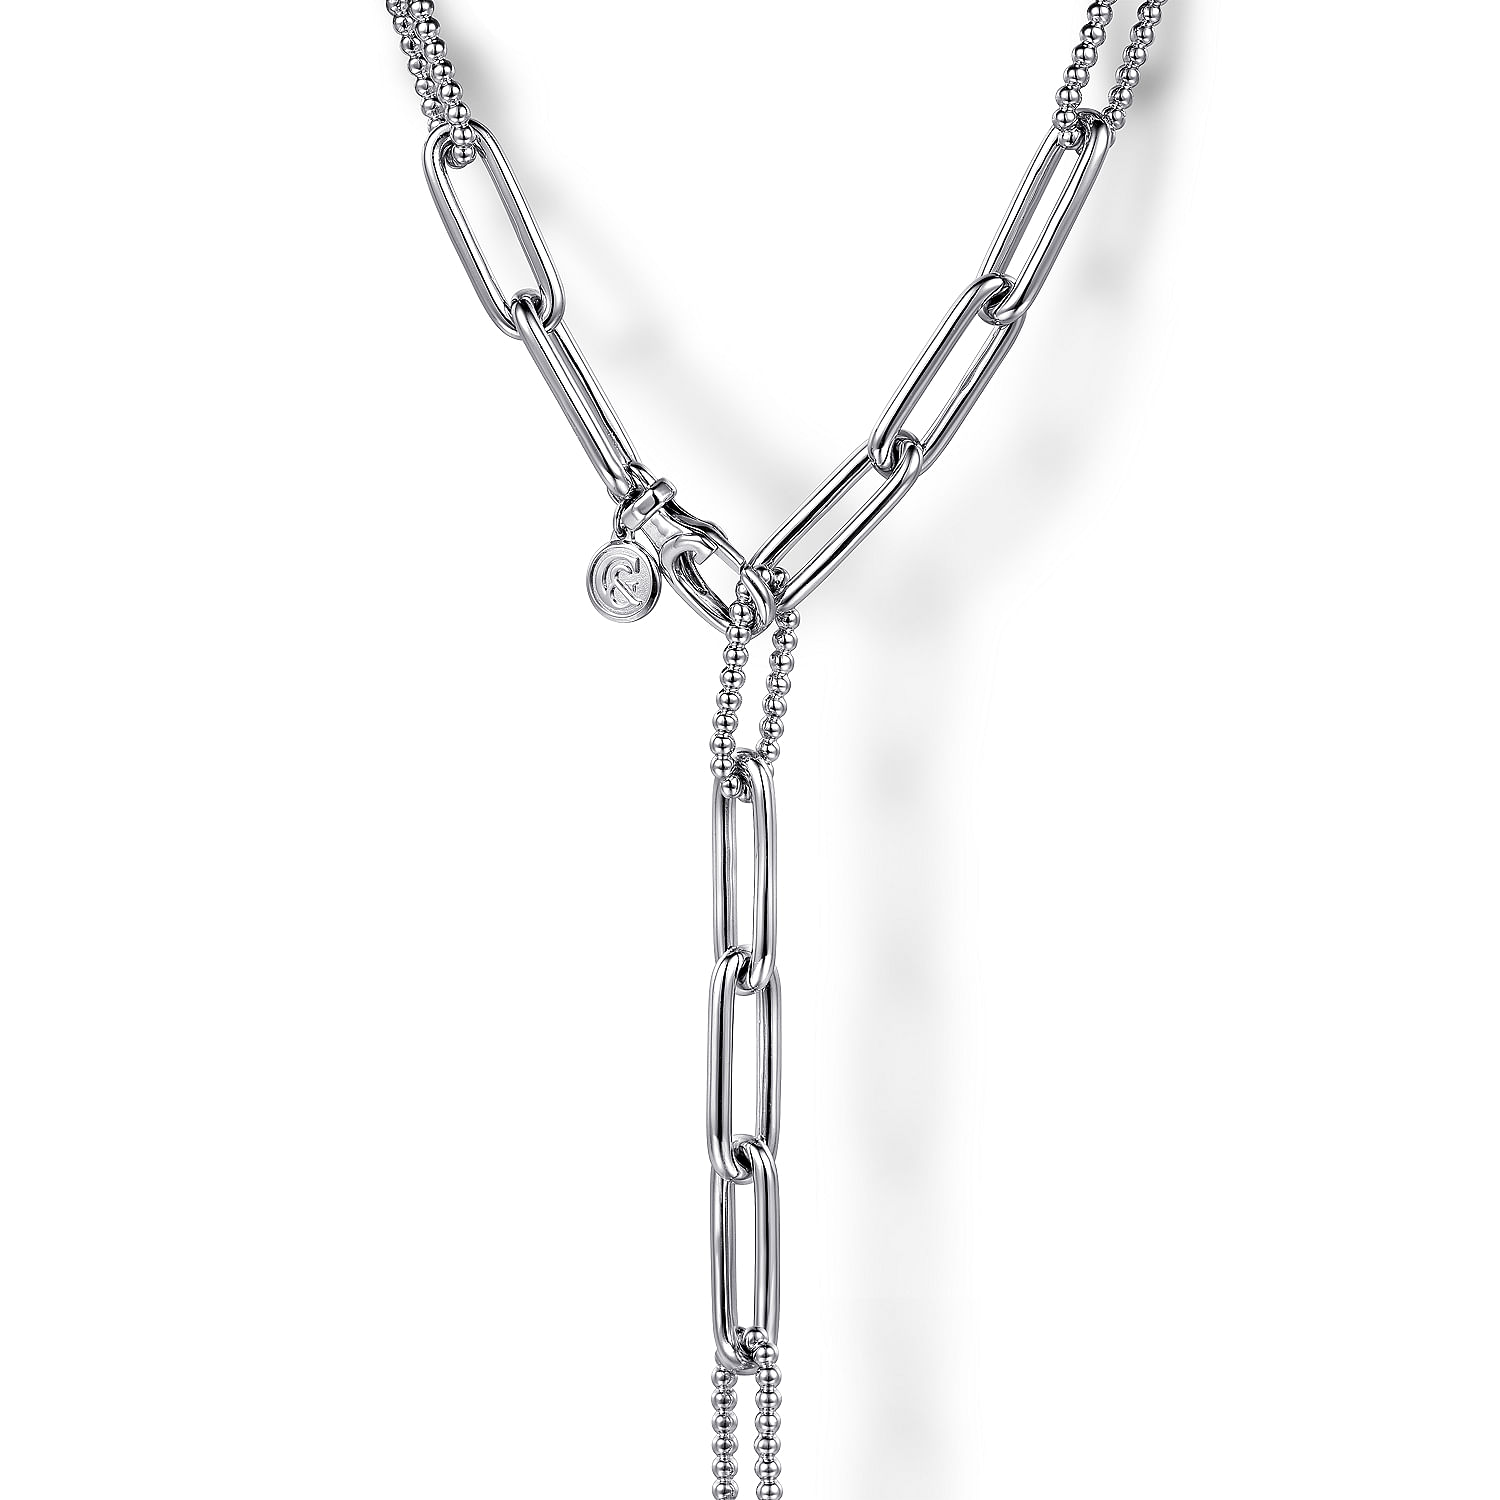 32 inch 925 Sterling Silver Bujukan Link Necklace